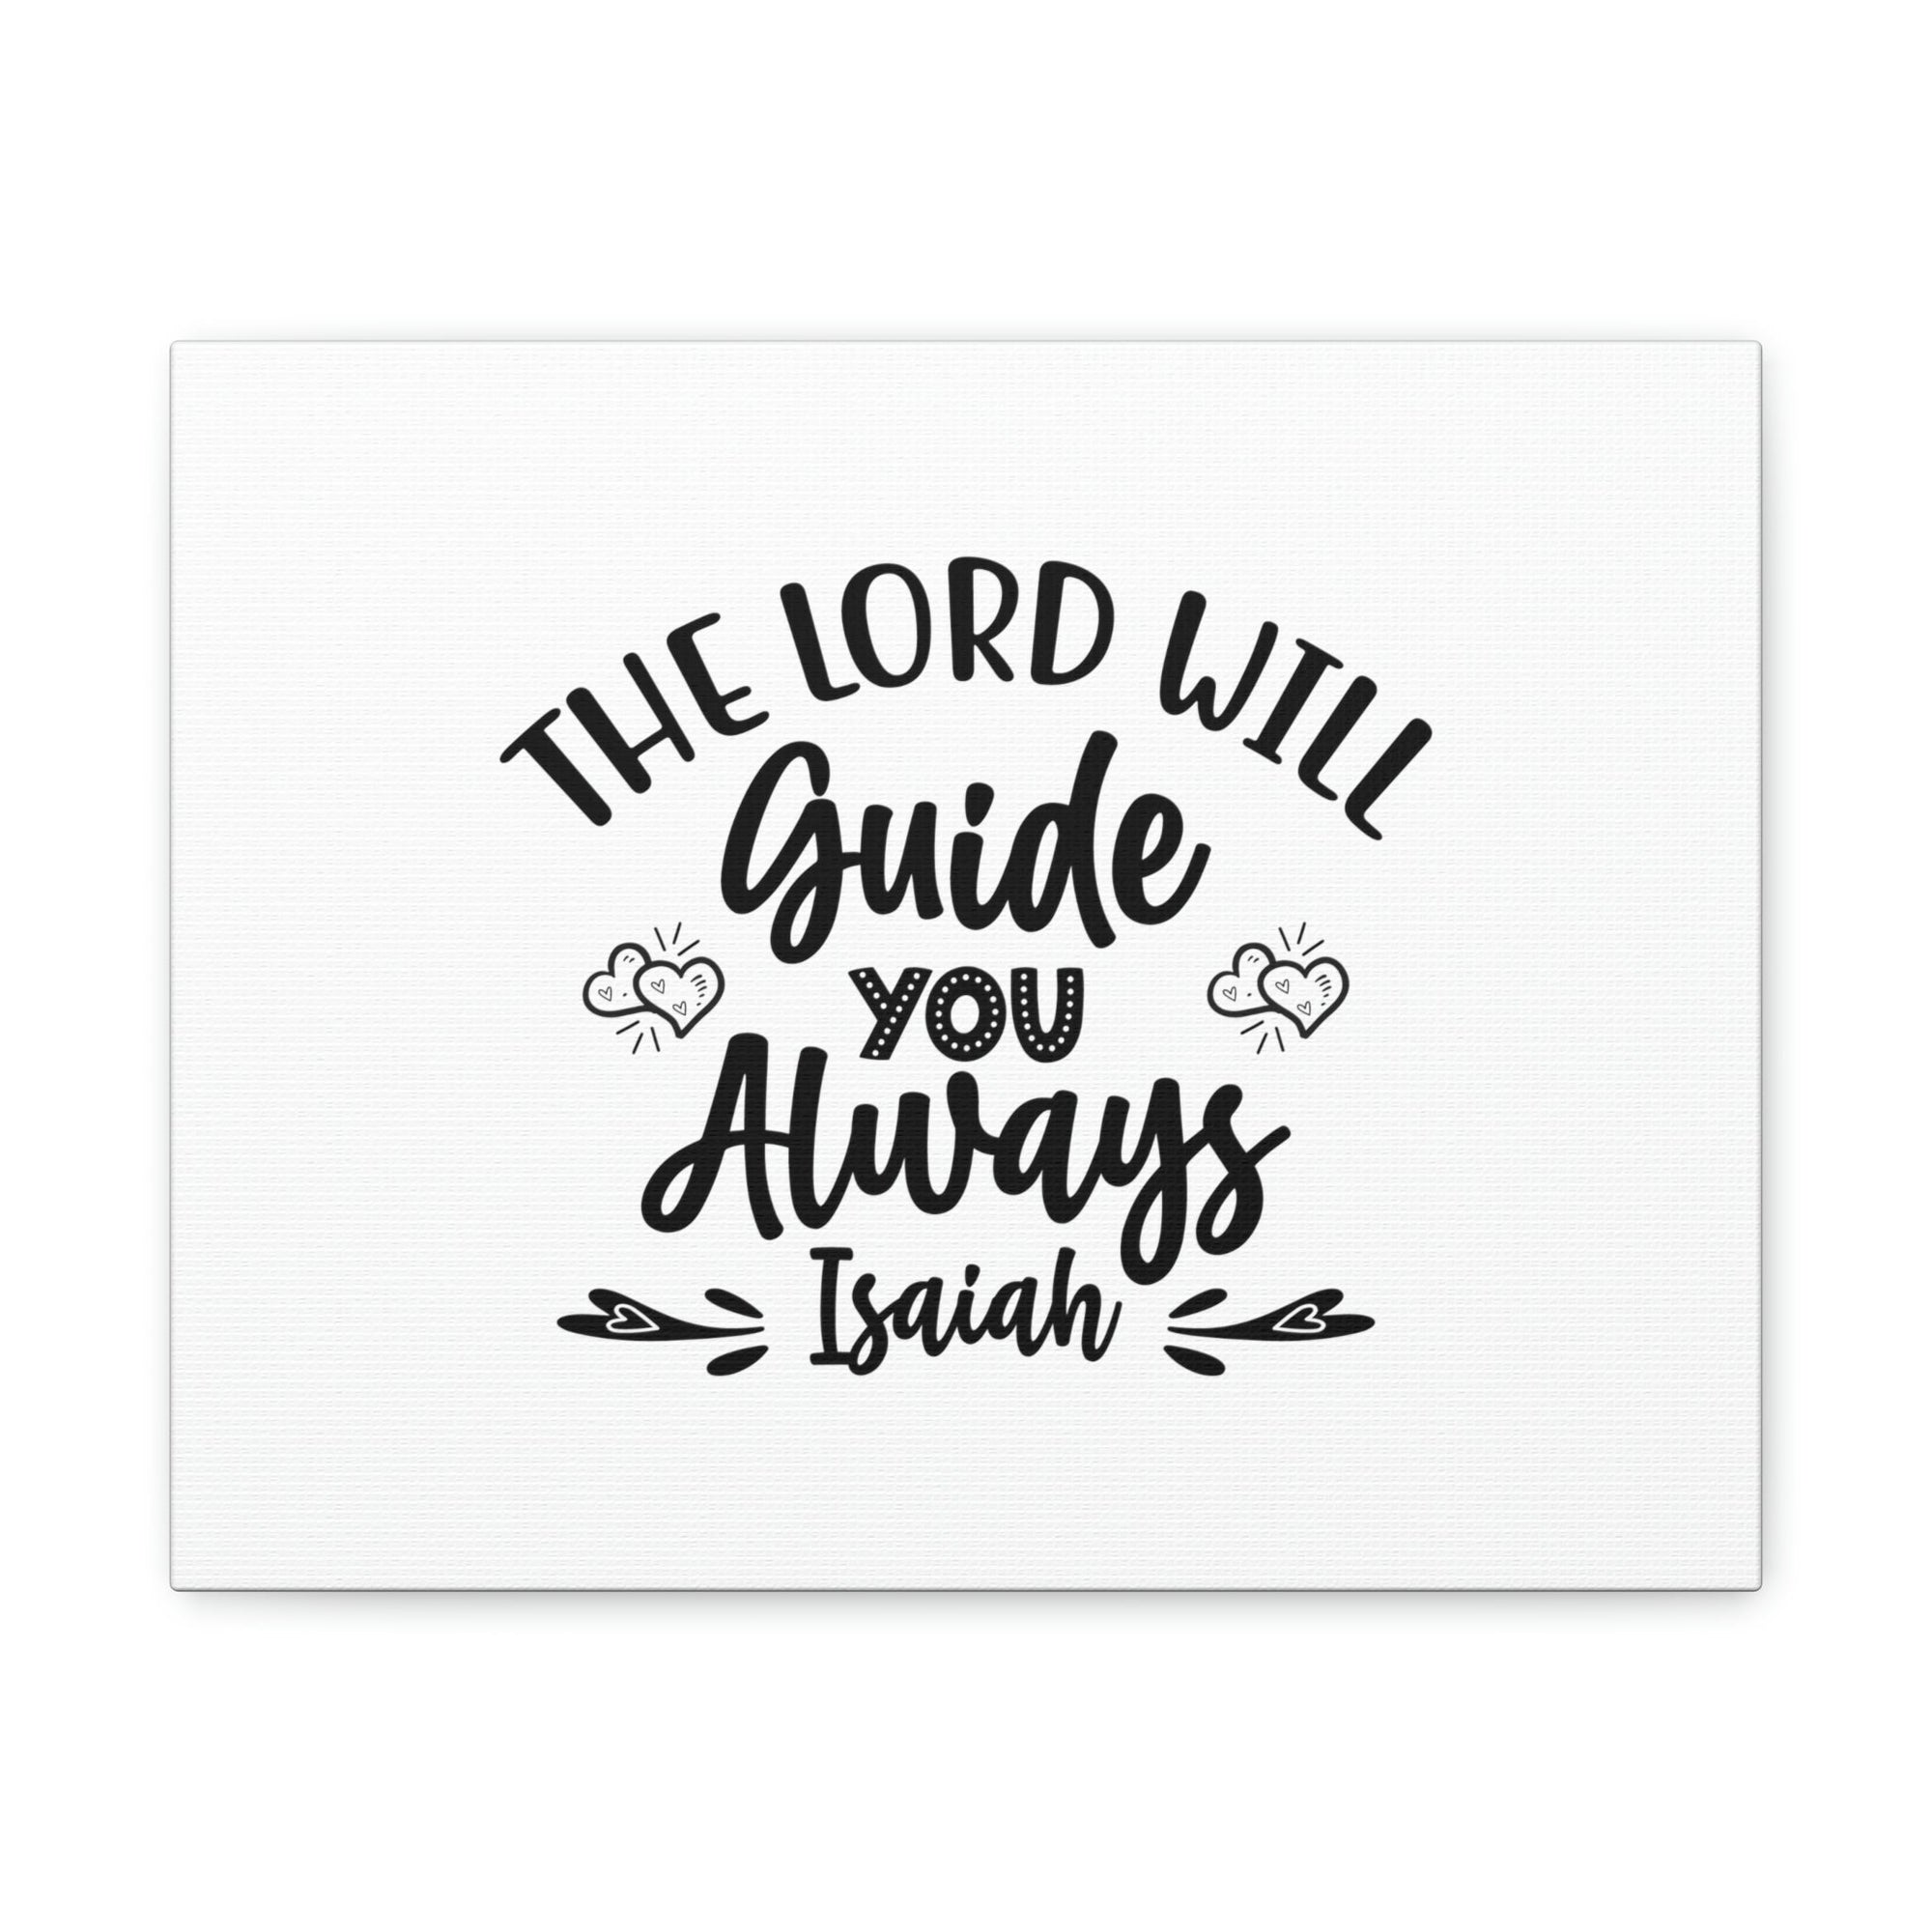 Scripture Walls Guide You Always Isaiah 58:11 Christian Wall Art Bible Verse Print Ready to Hang Unframed-Express Your Love Gifts